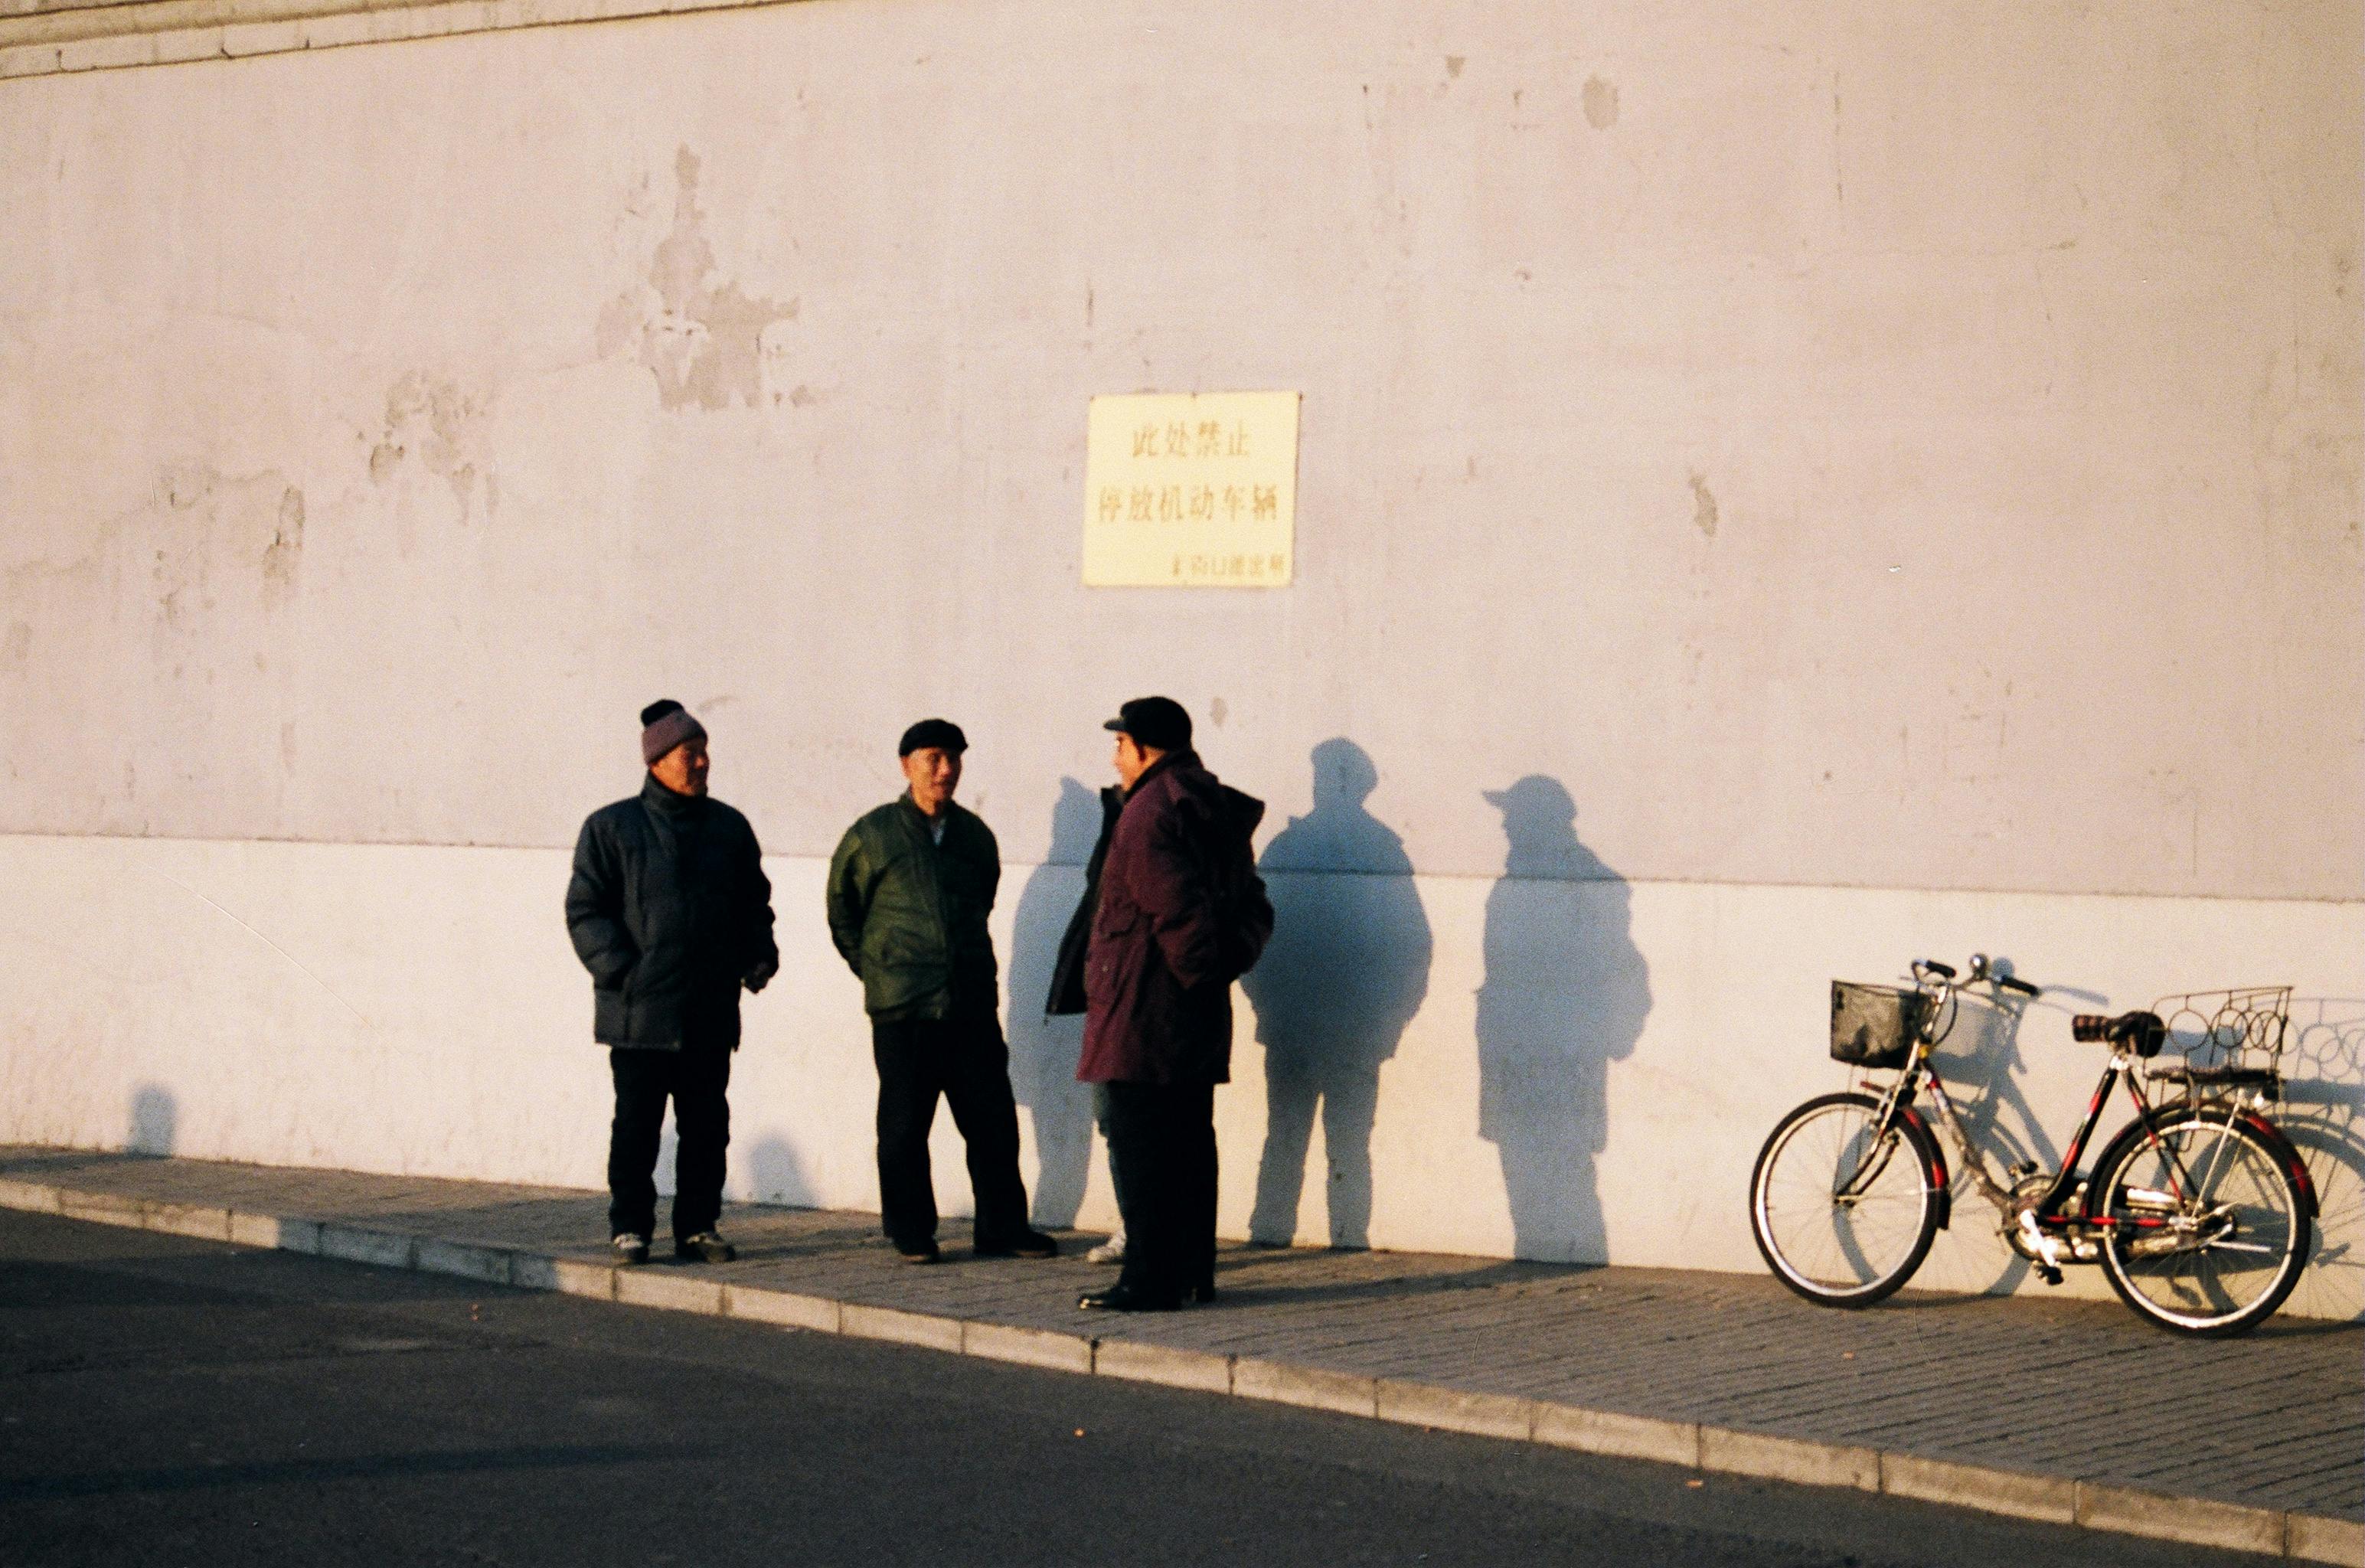 Three men standing near parked bicycle | Photo: Pexels